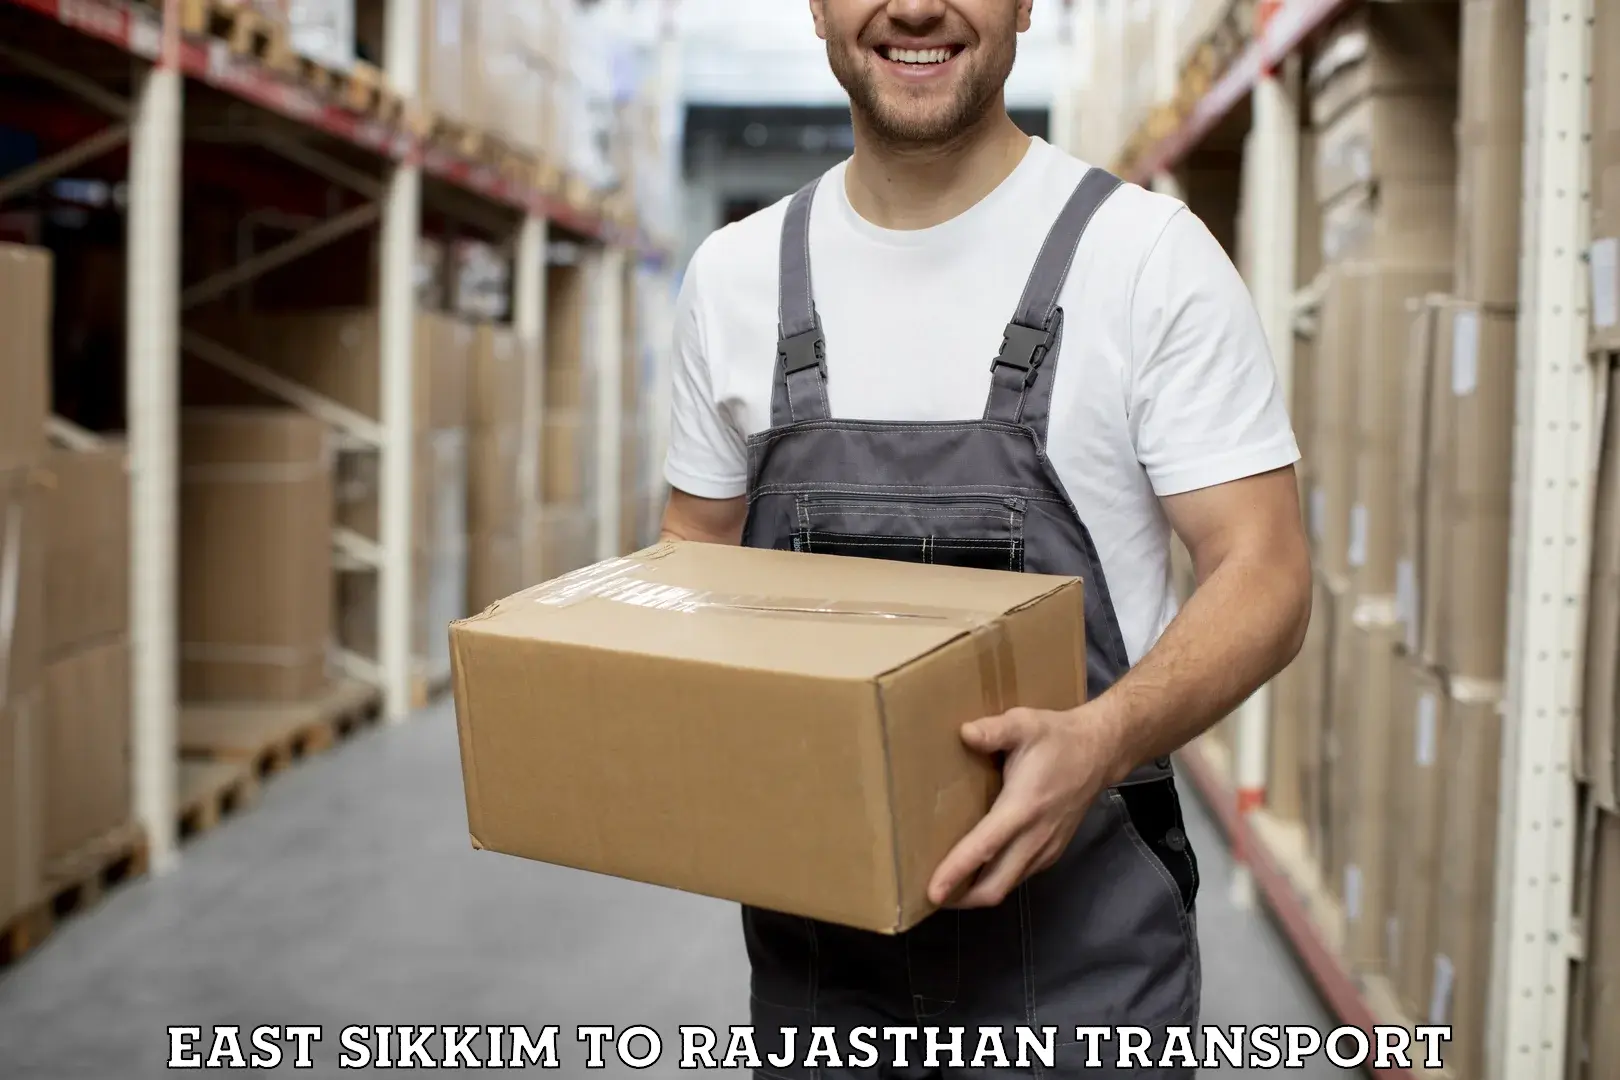 Commercial transport service East Sikkim to Sikar